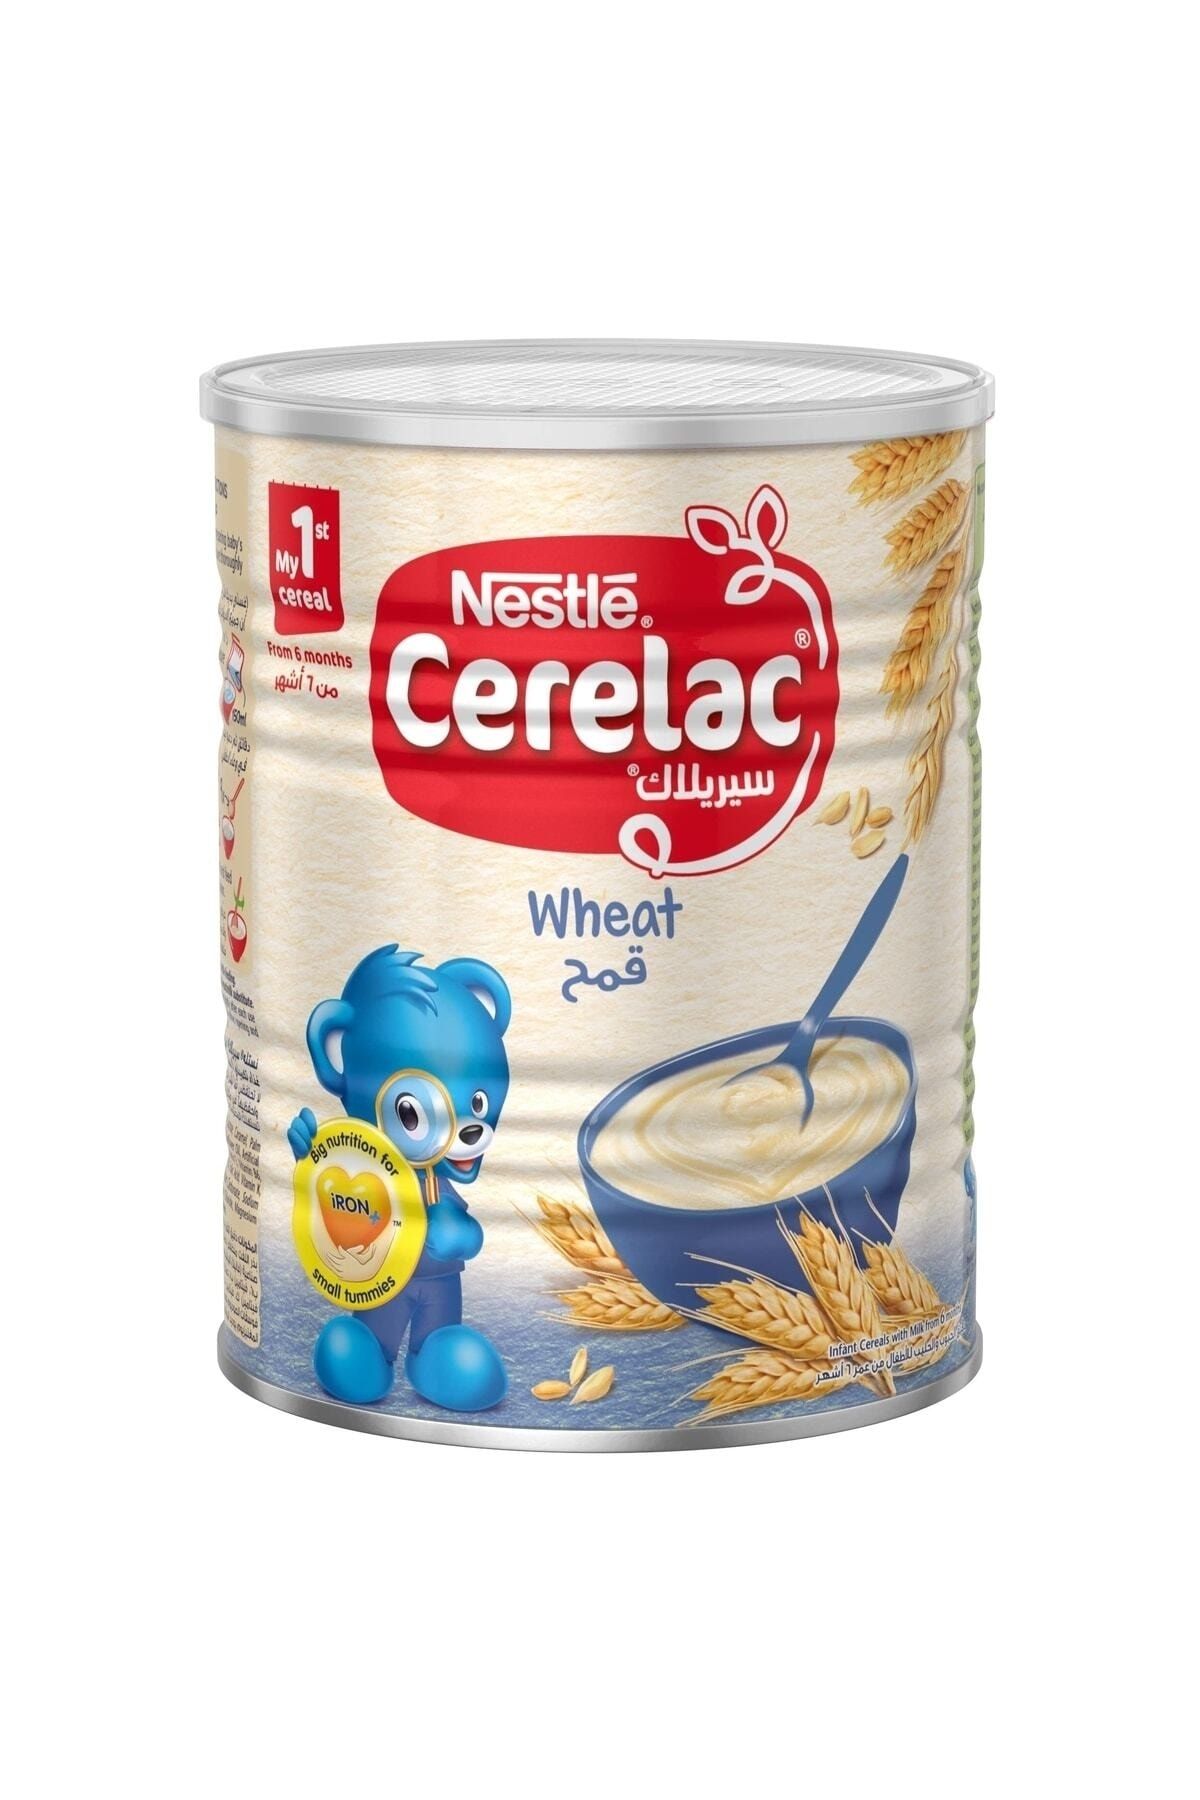 Nestle Cerelac Infant Cereal Wheat - 400g